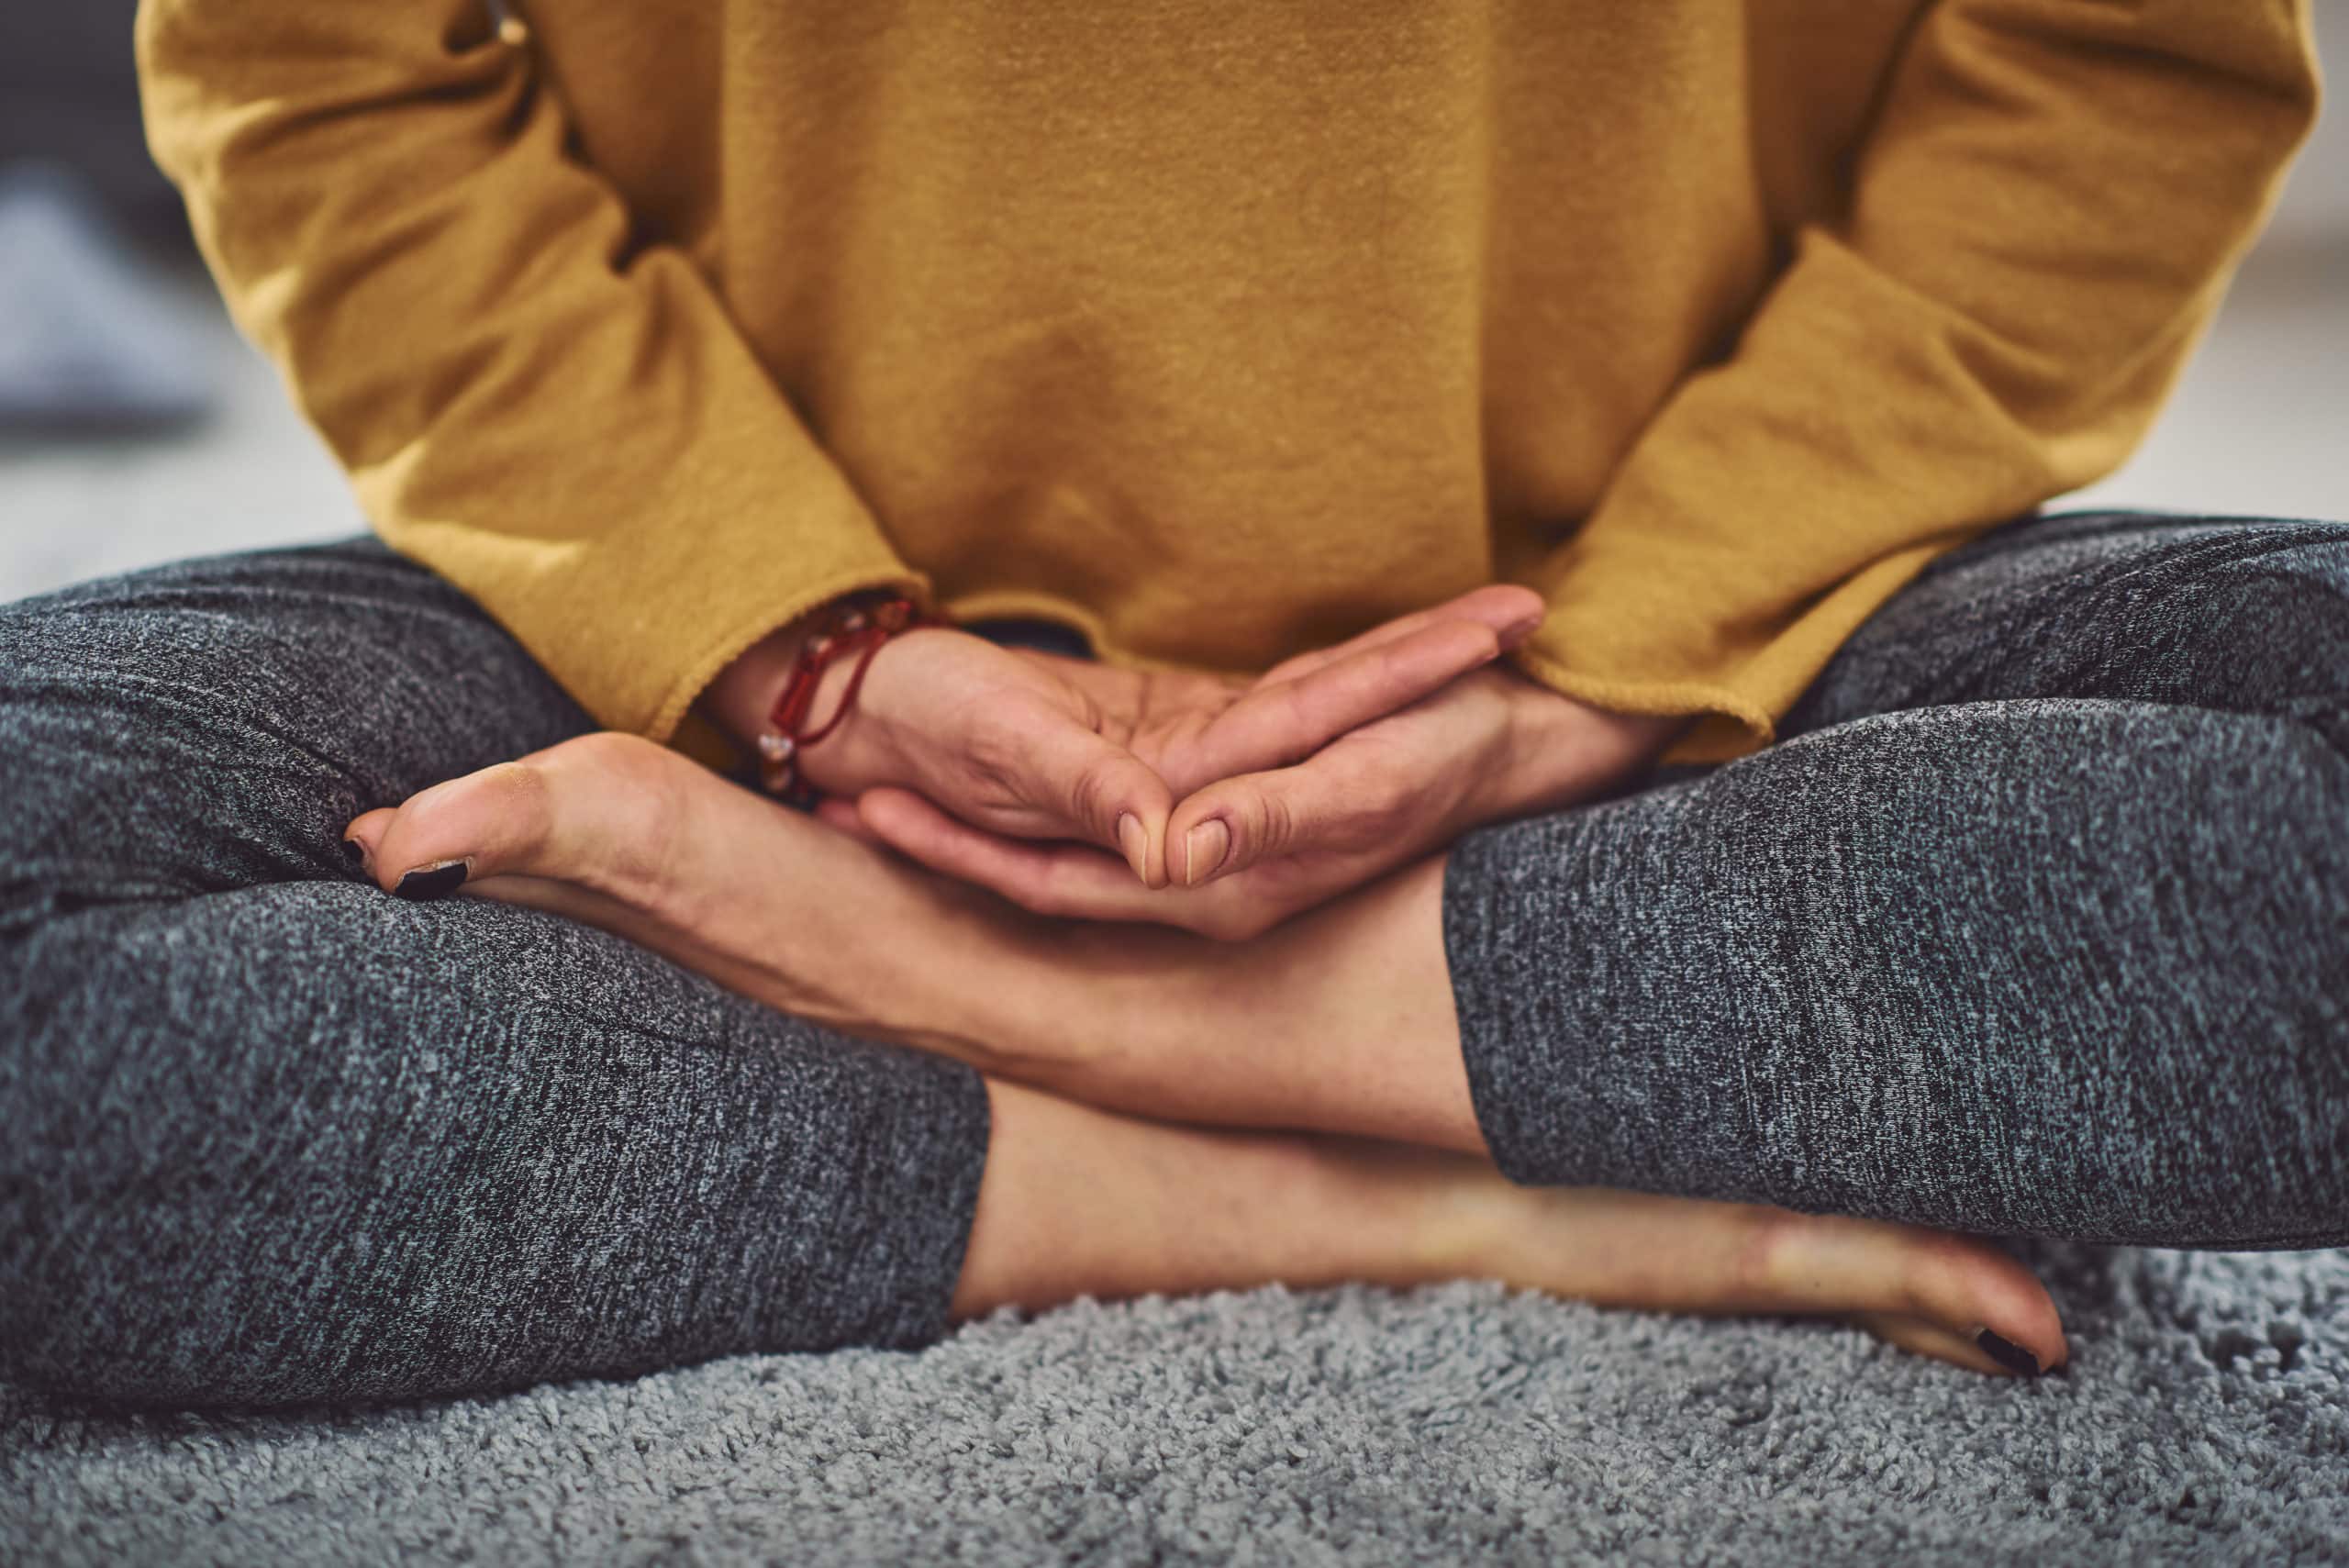 “Koru was developed as an introduction to mindfulness for busy people who feel they ‘don’t have time to meditate,’” said Puru Thapa, M.D., director of the UAMS Mindfulness Program, professor of psychiatry and the director of Student, Resident and Faculty Wellness at UAMS.